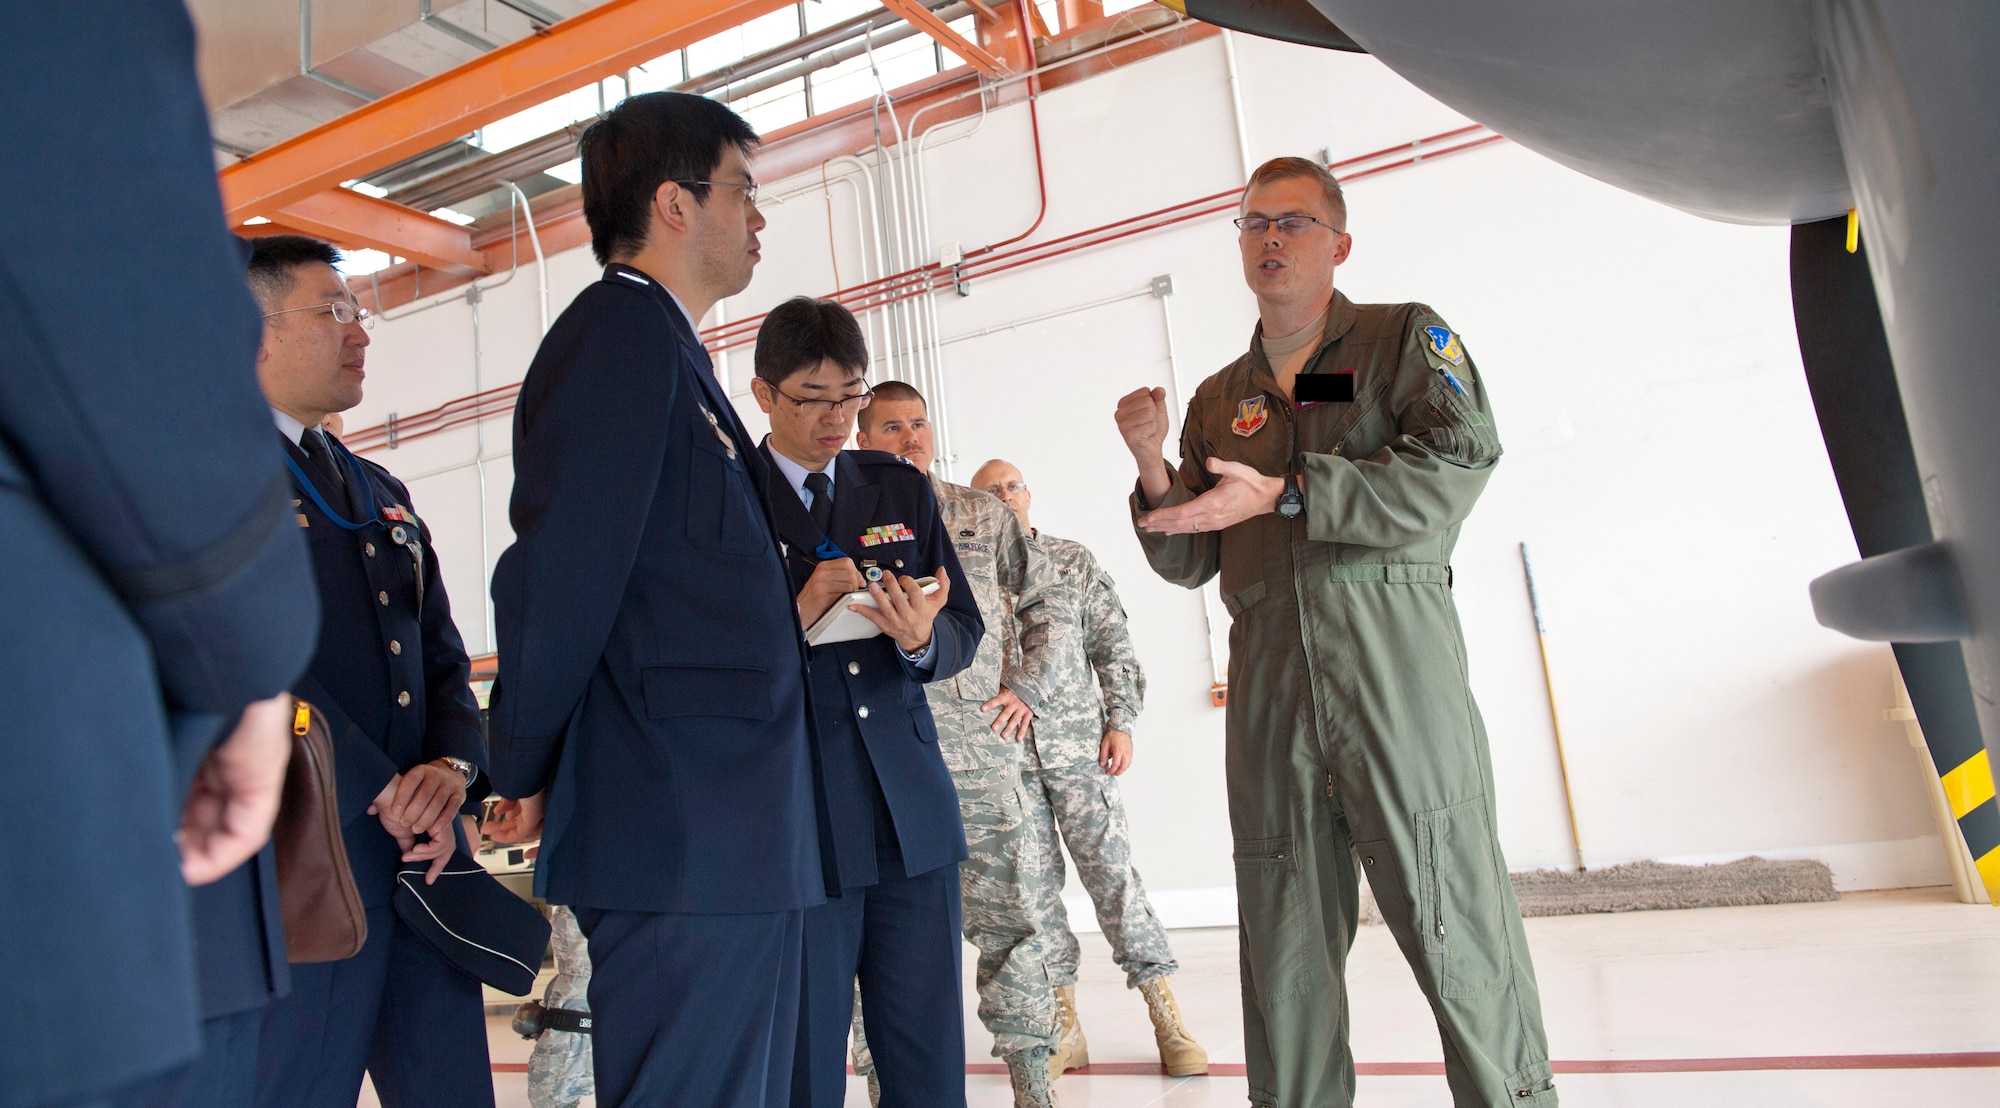 Major Michael (last name withheld due to operations security constraints), 9th Attack Squadron flight commander, explains the MQ-9 Reaper’s flight patterns to members of the Japan Air Self Defense Force at Holloman Air Force Base, N.M., March 19. The Remotely Piloted Aircraft program was briefed to the members of the Japan Air Self Defense Force. Their visit to Holloman AFB was part of an effort to bolster Japanese intelligence, surveillance and reconnaissance capability. (U.S. Air Force photo by Airman 1st Class Colin Cates/Released) 